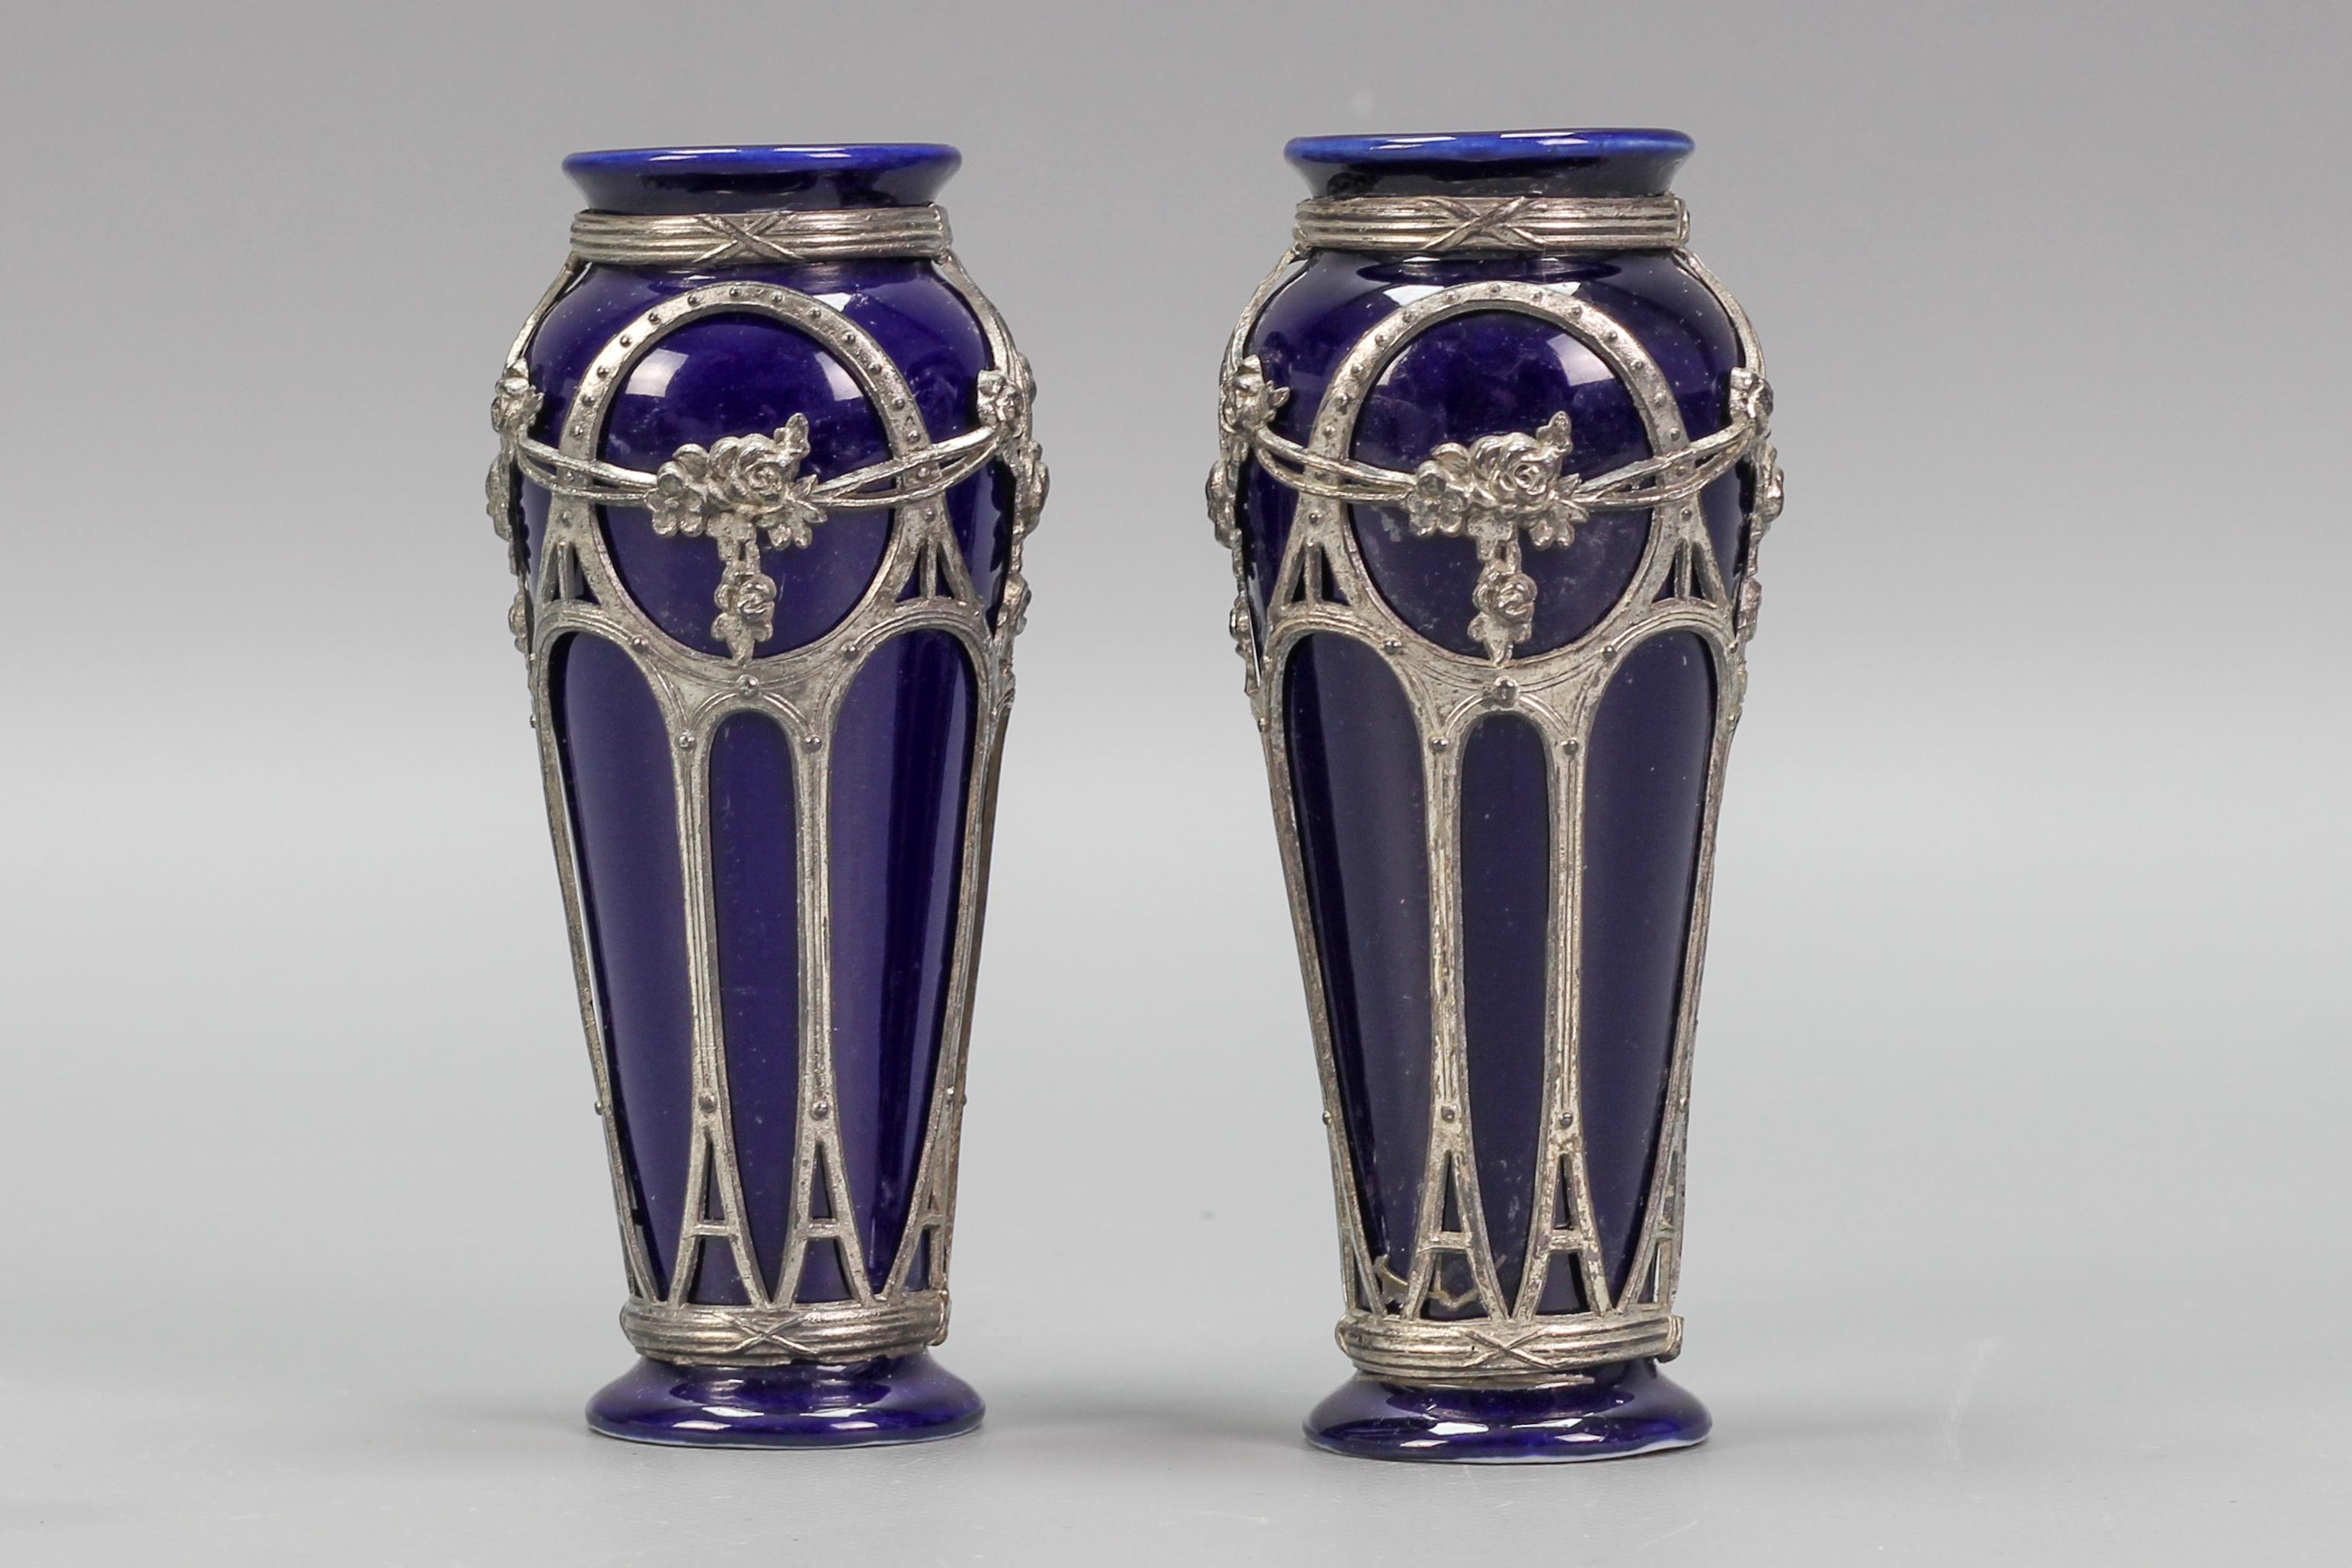 Pair of Small Art Nouveau Blue Glazed Ceramic Vases In Good Condition For Sale In Barntrup, DE